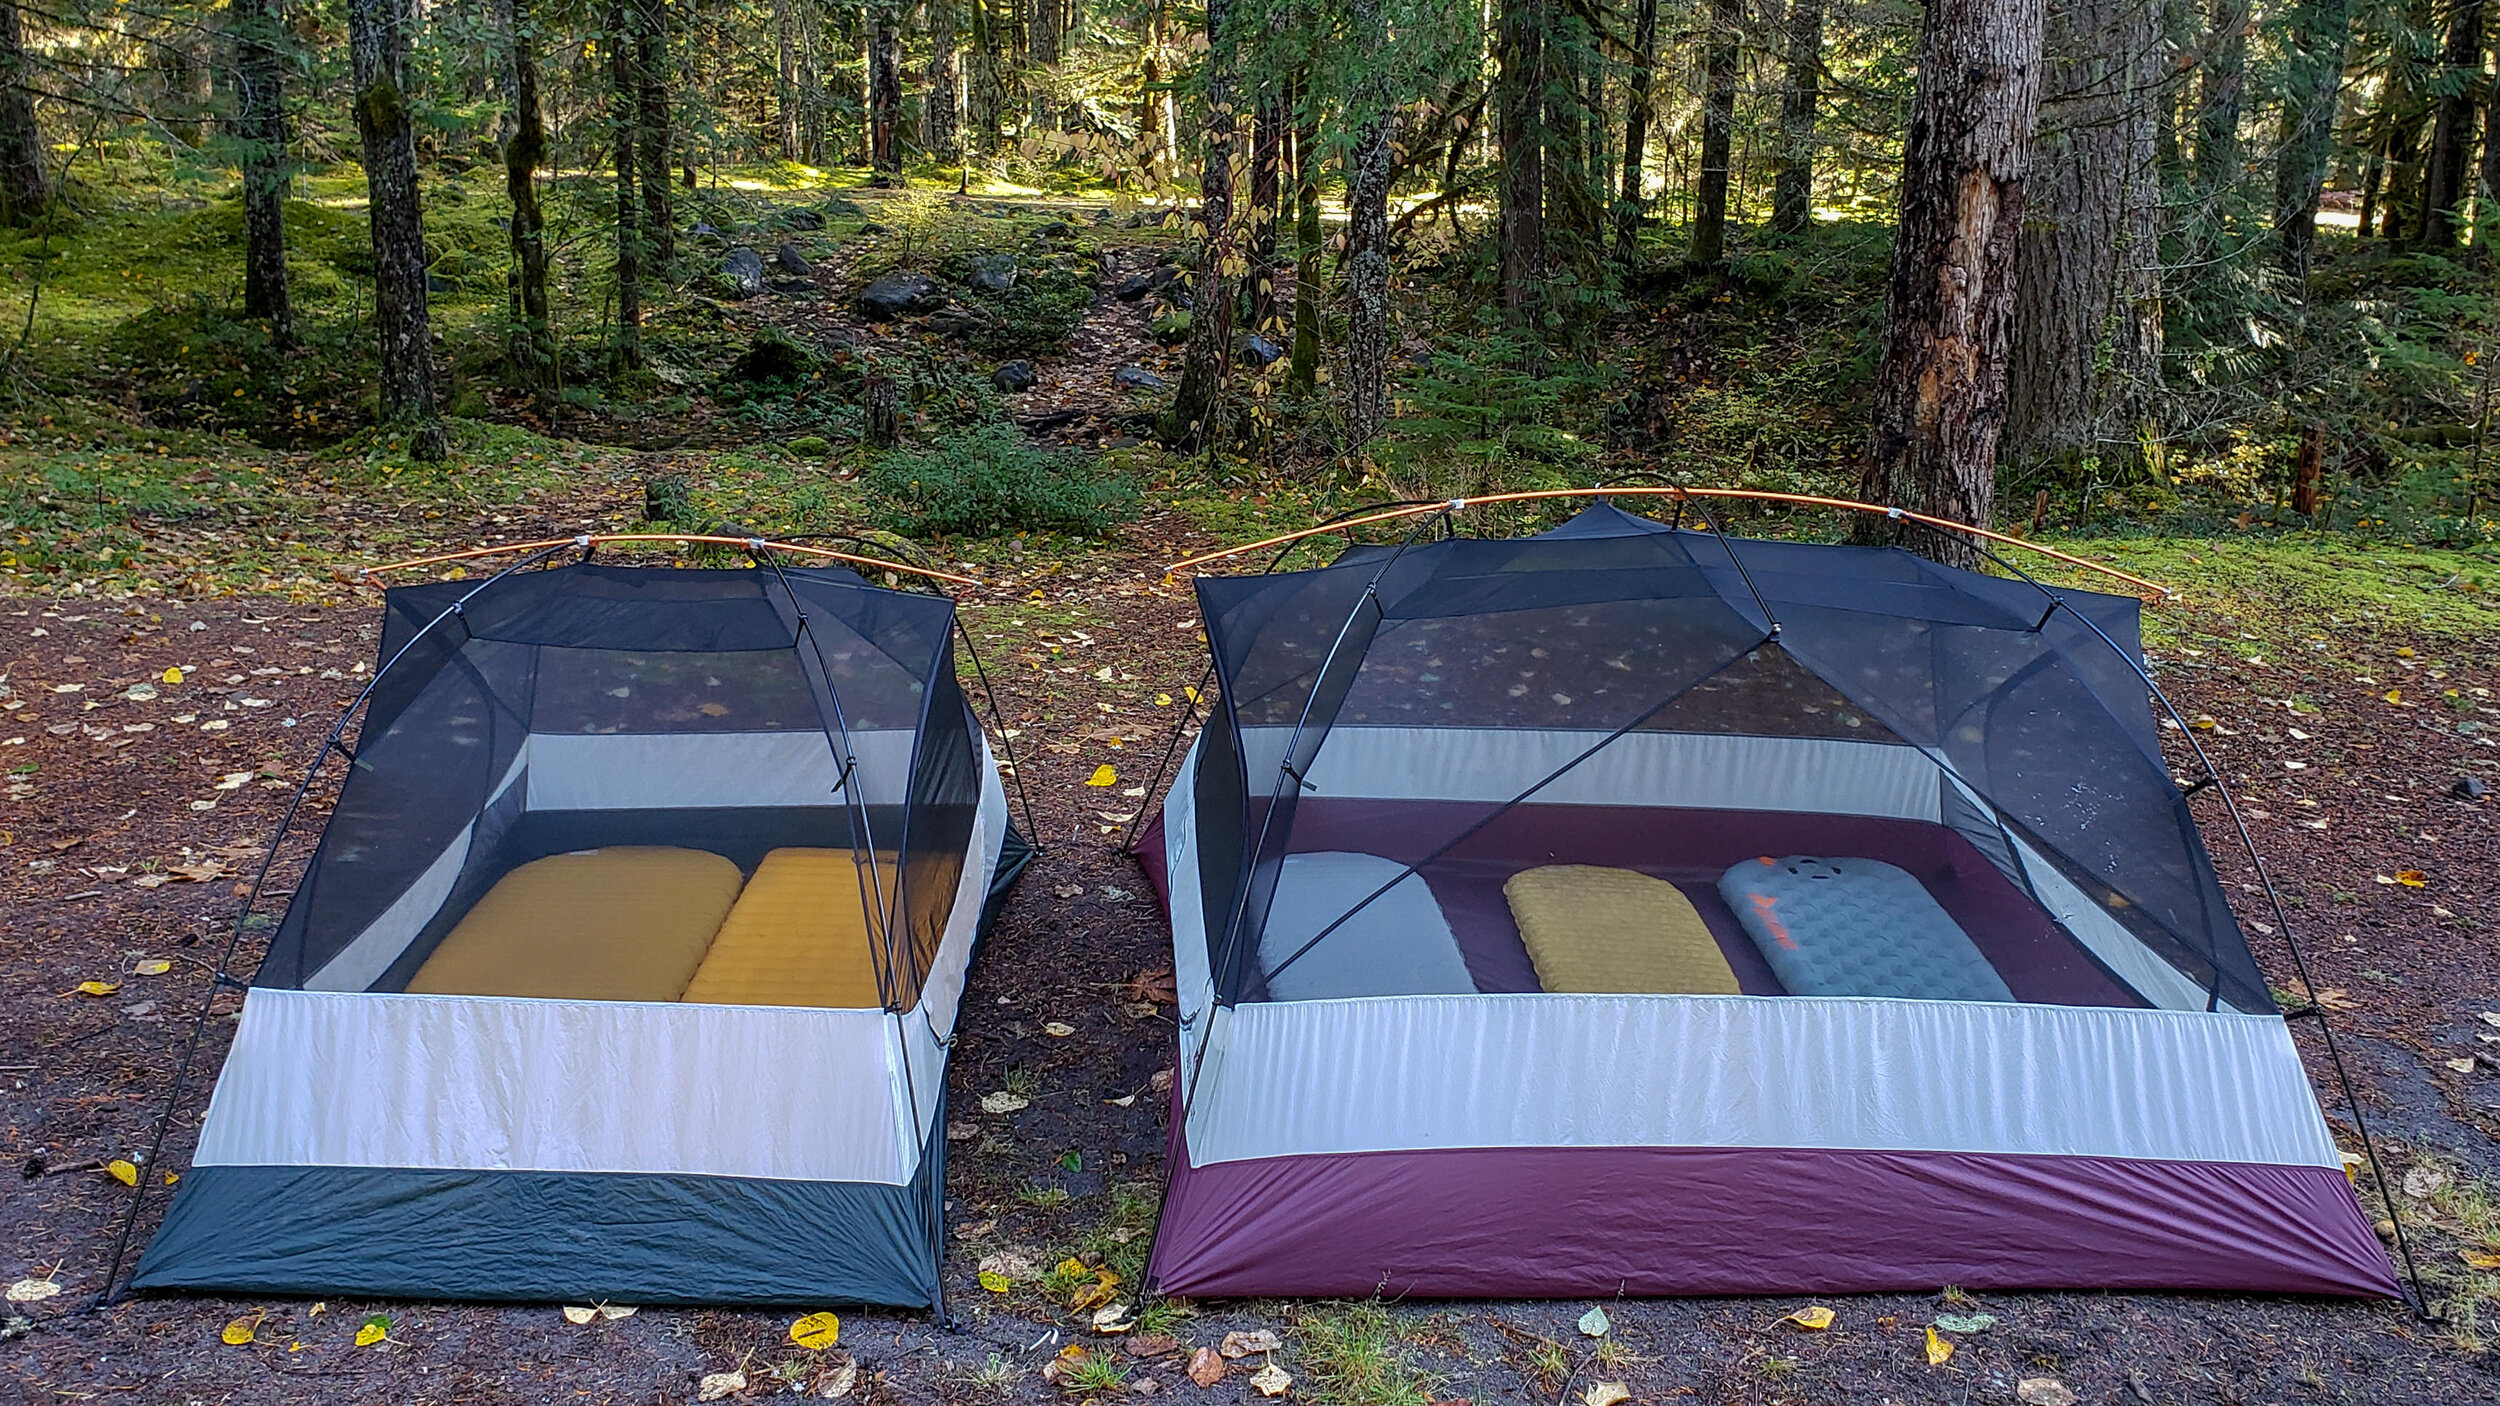 Difference in size between the REI half dome 2 plus (with two wide pads) and half dome 4 plus (with three regular pads).